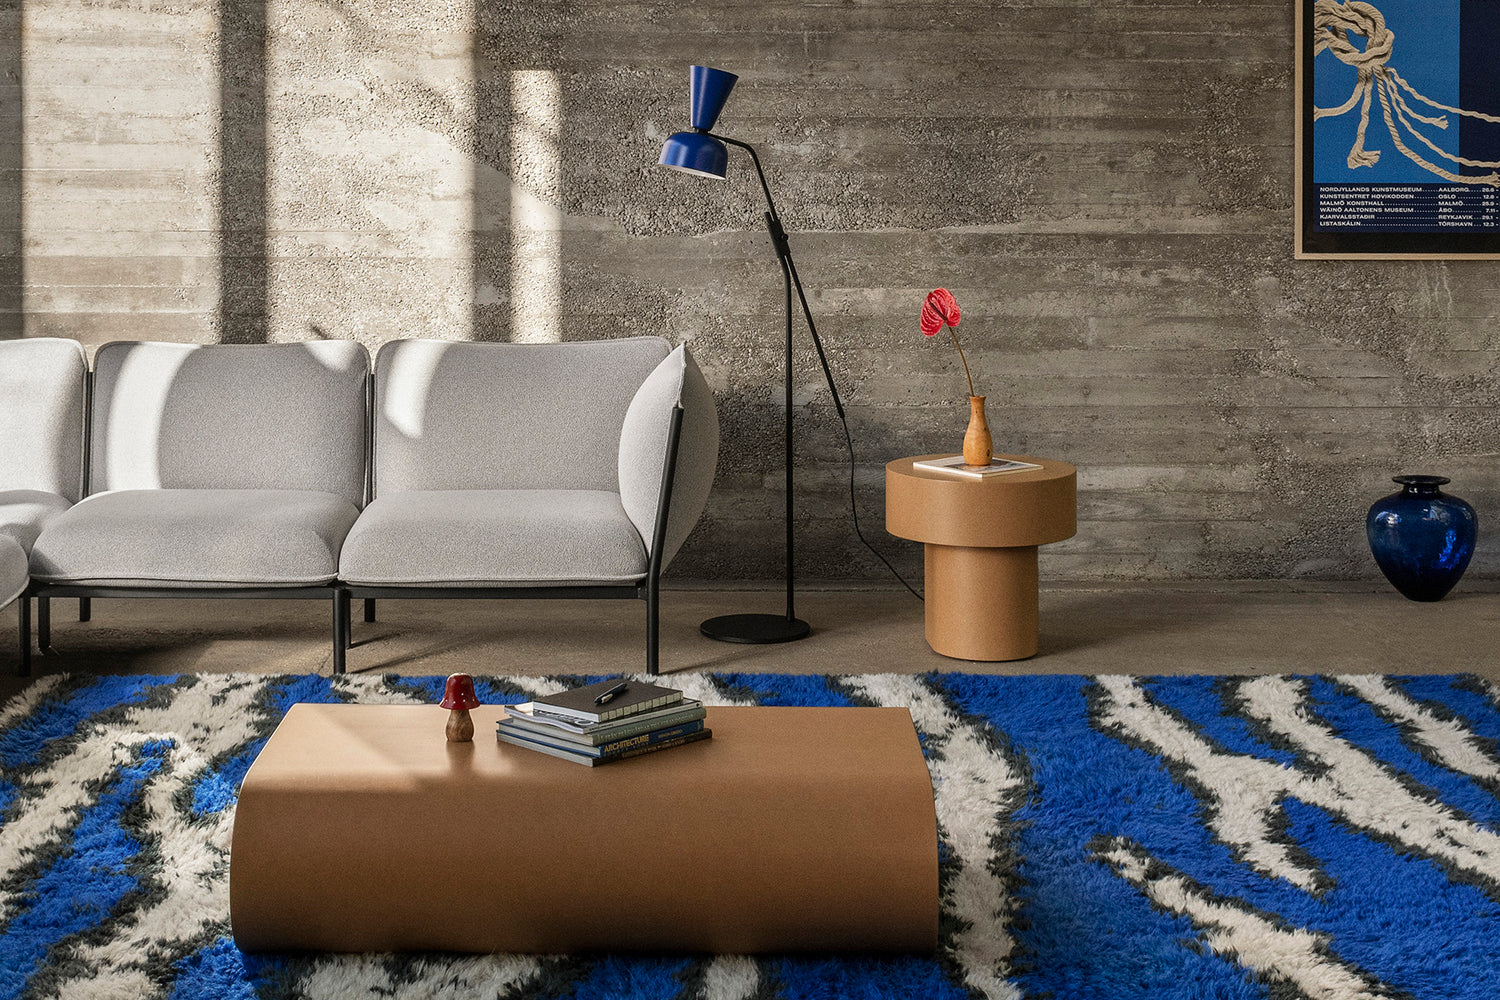 A living room scene featuring Kumo Sofa in Porcelain, Monster Rug Ultramarine Blue / Off-White, Stump Coffee Table Medium Natural, Alphabeta Floor Lamp Blue and Stump Side Table Natural.